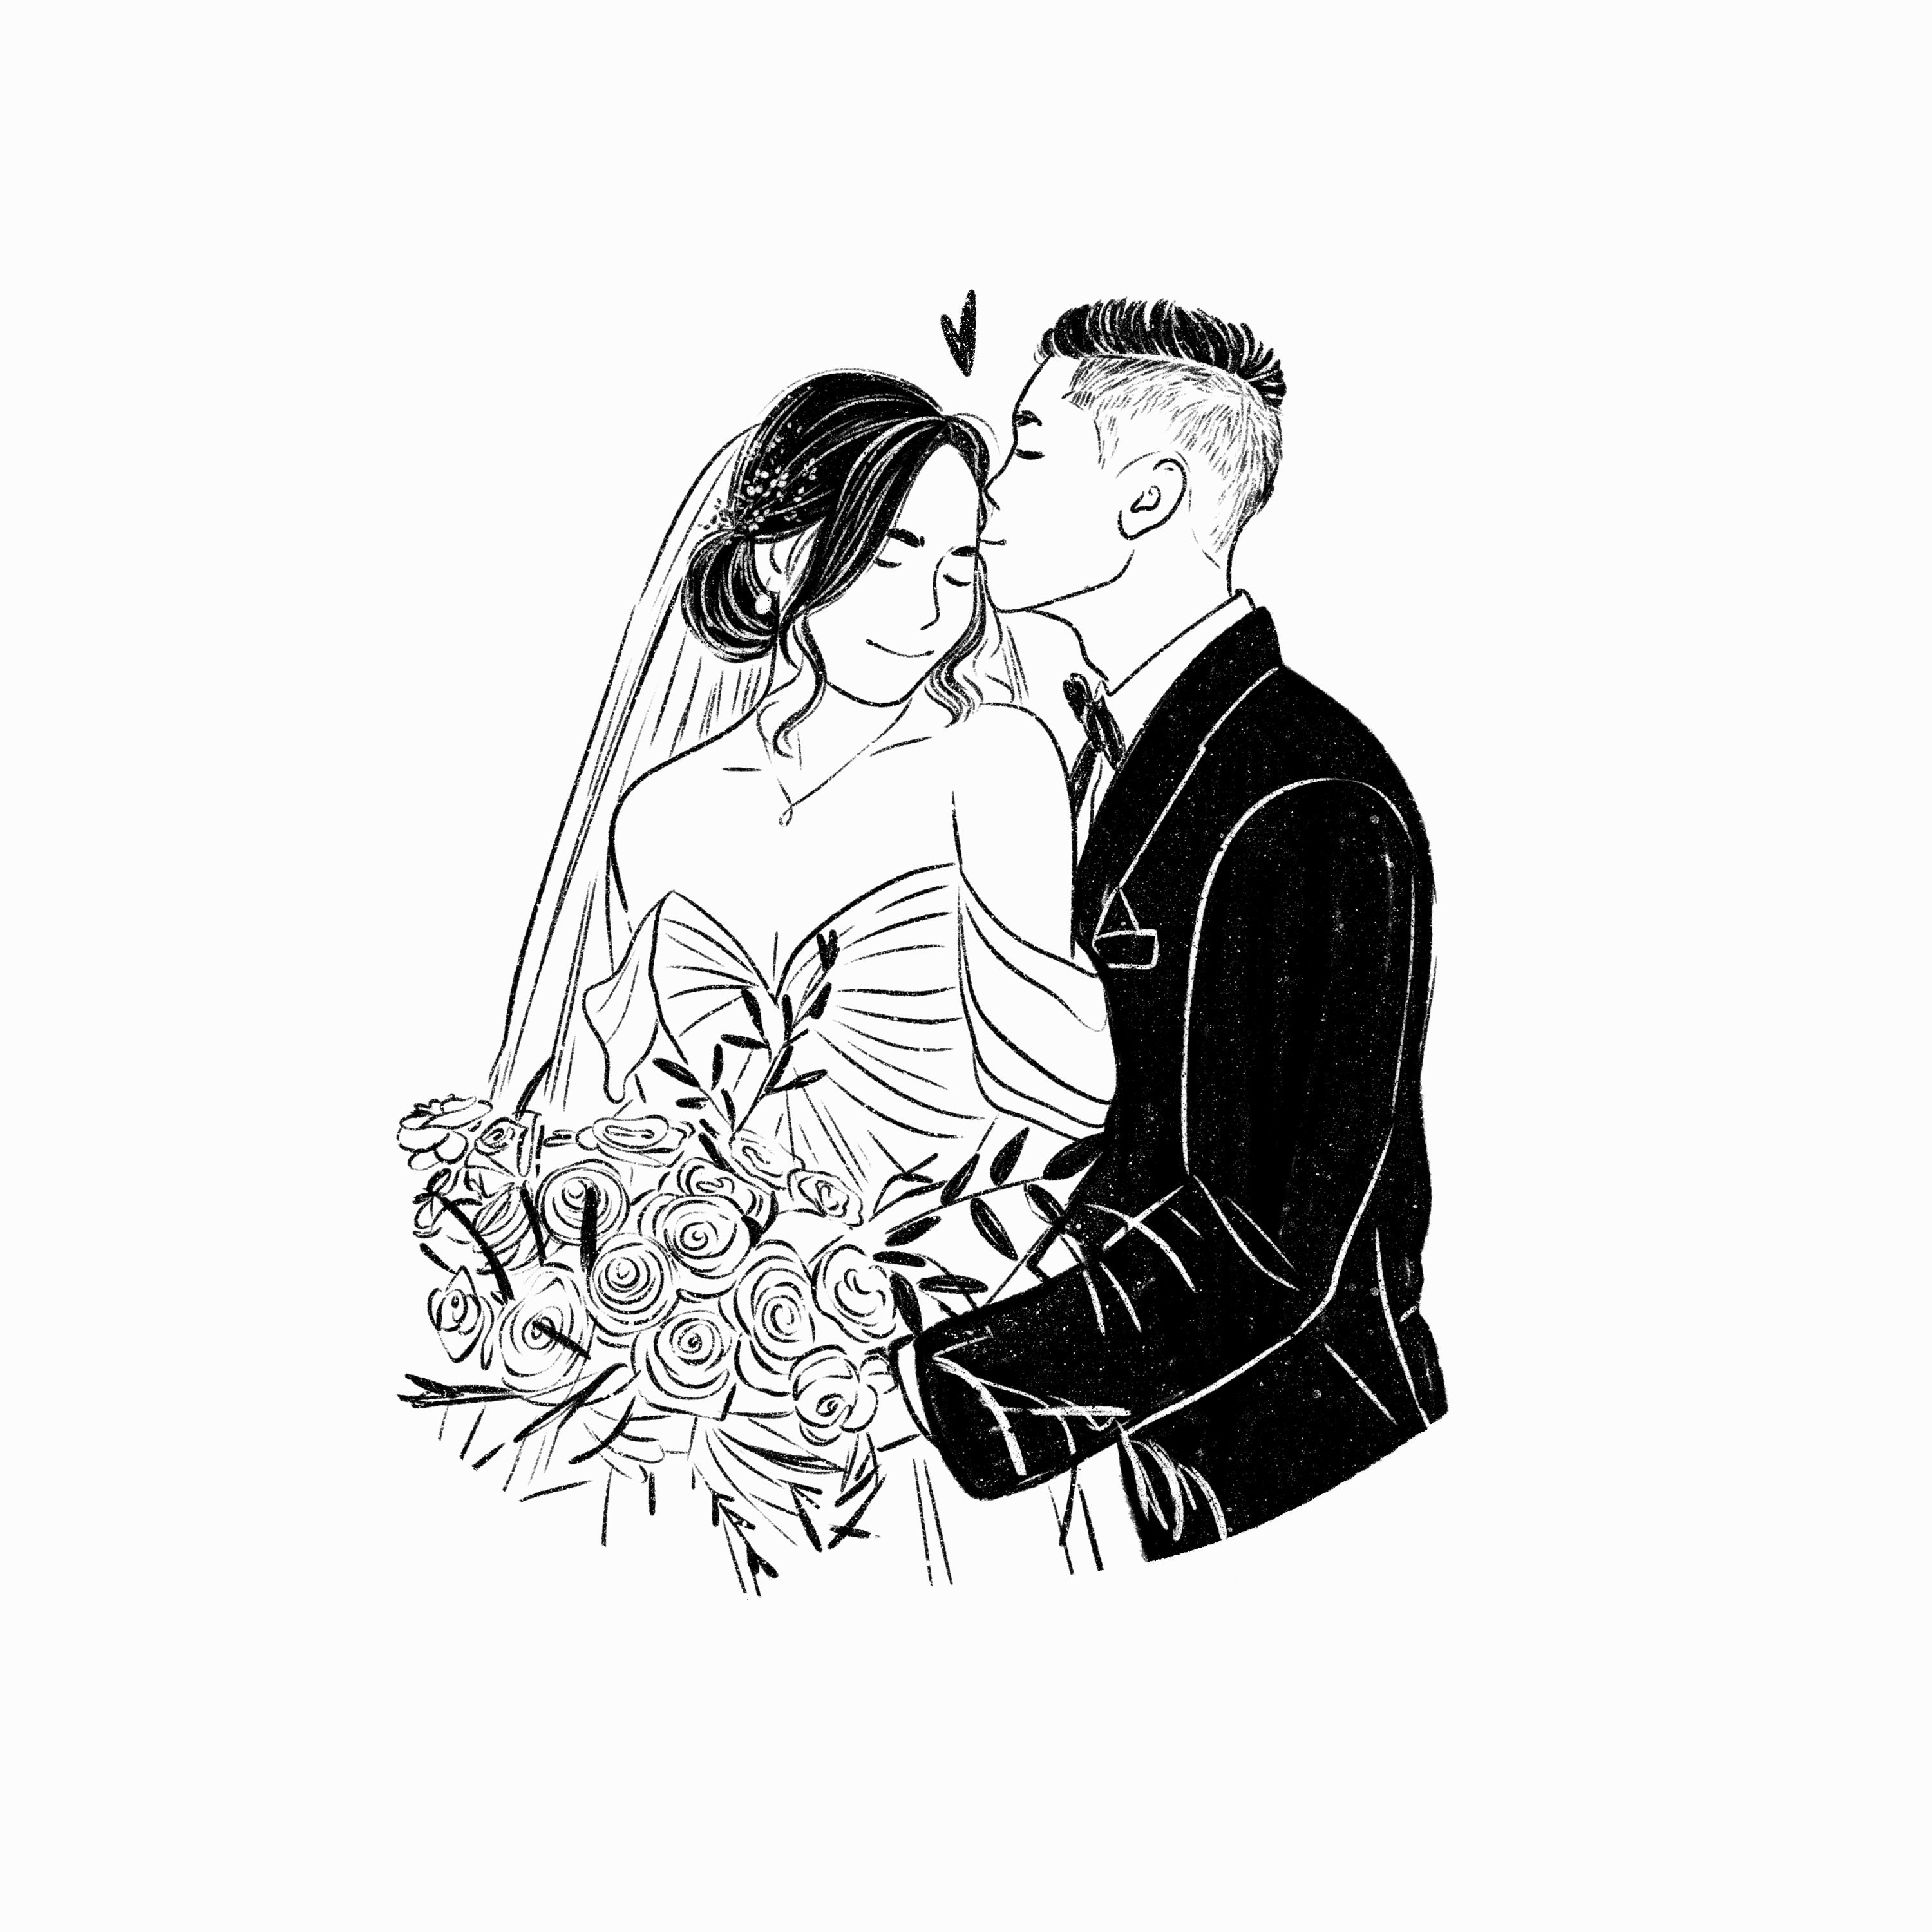 Just Married Couple On Motorbike Or Moped Sketch Vector Illustration  Isolated Stock Illustration - Download Image Now - iStock